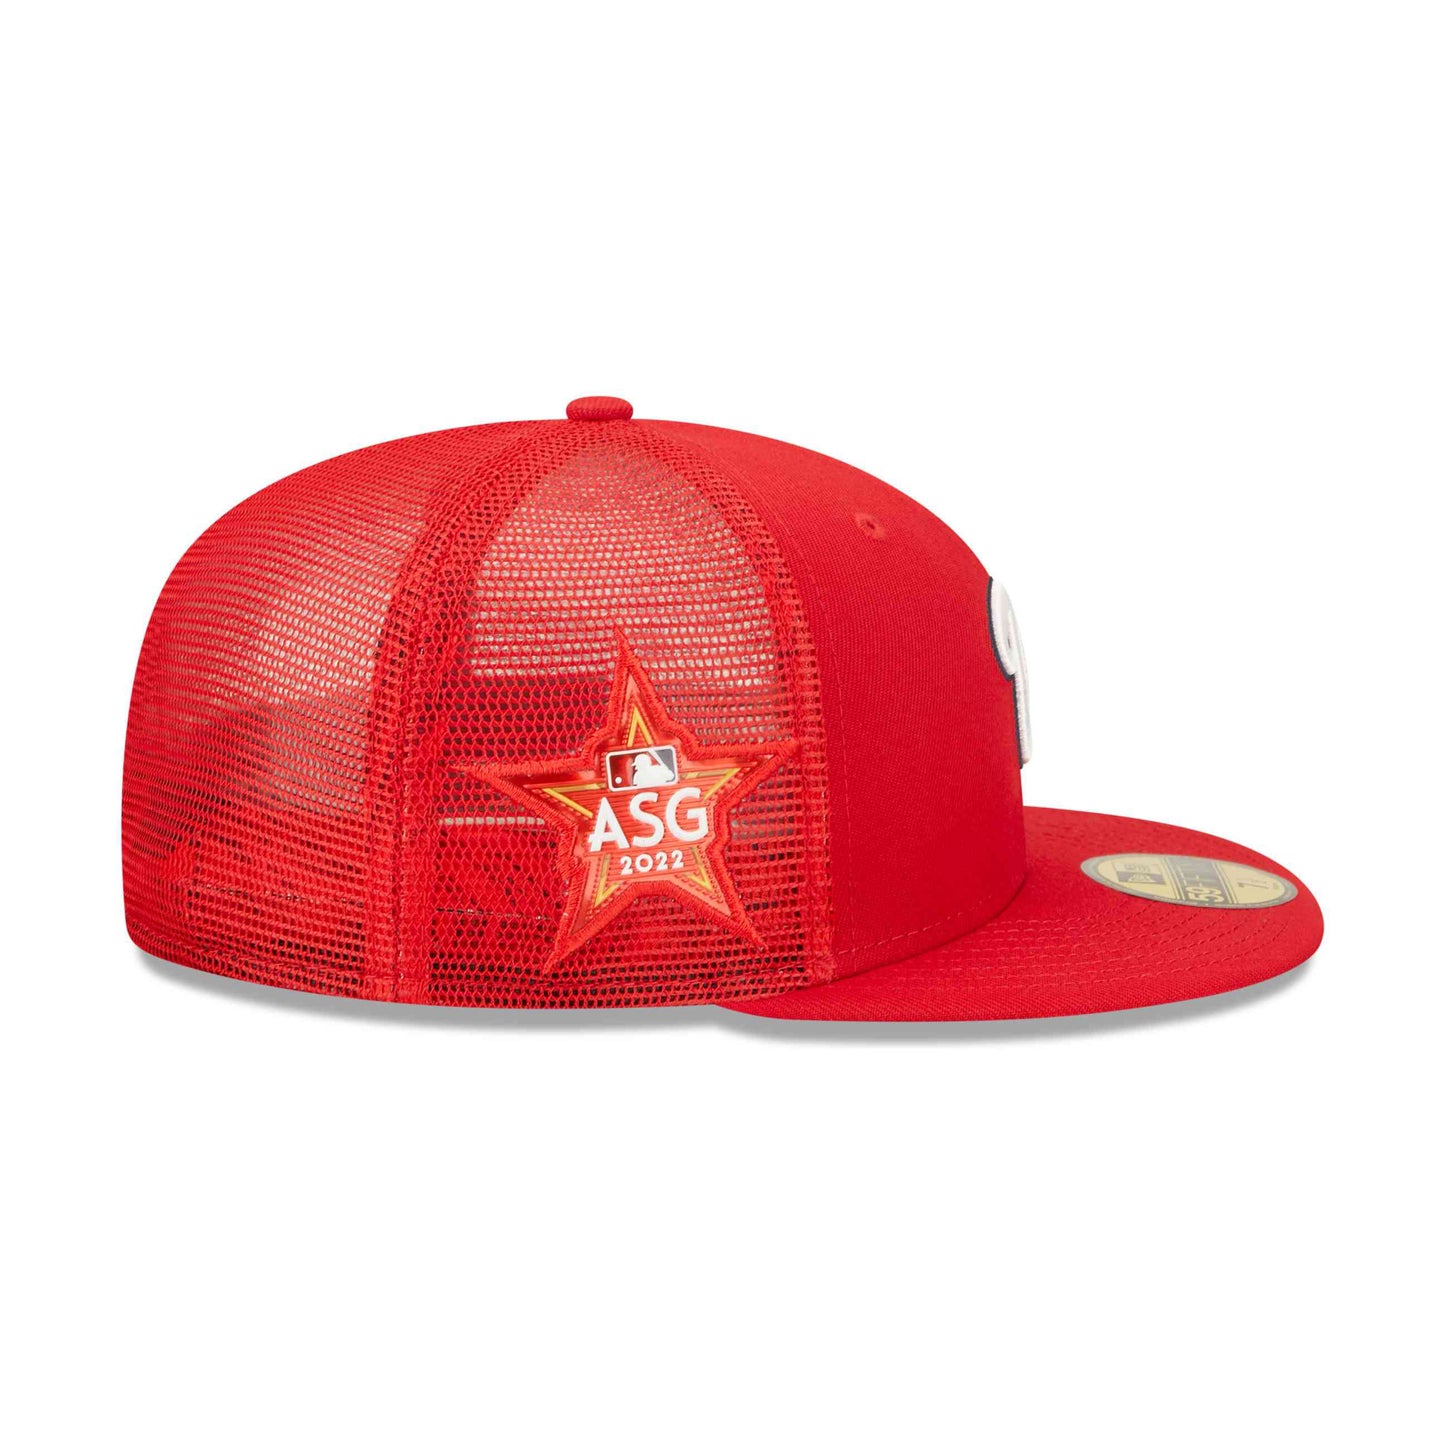 NEW ERA 59FIFTY MLB WASHINGTON NATIONALS ALL STAR GAME 2022 RED / TROPIC RED UV FITTED TRUCKER CAP